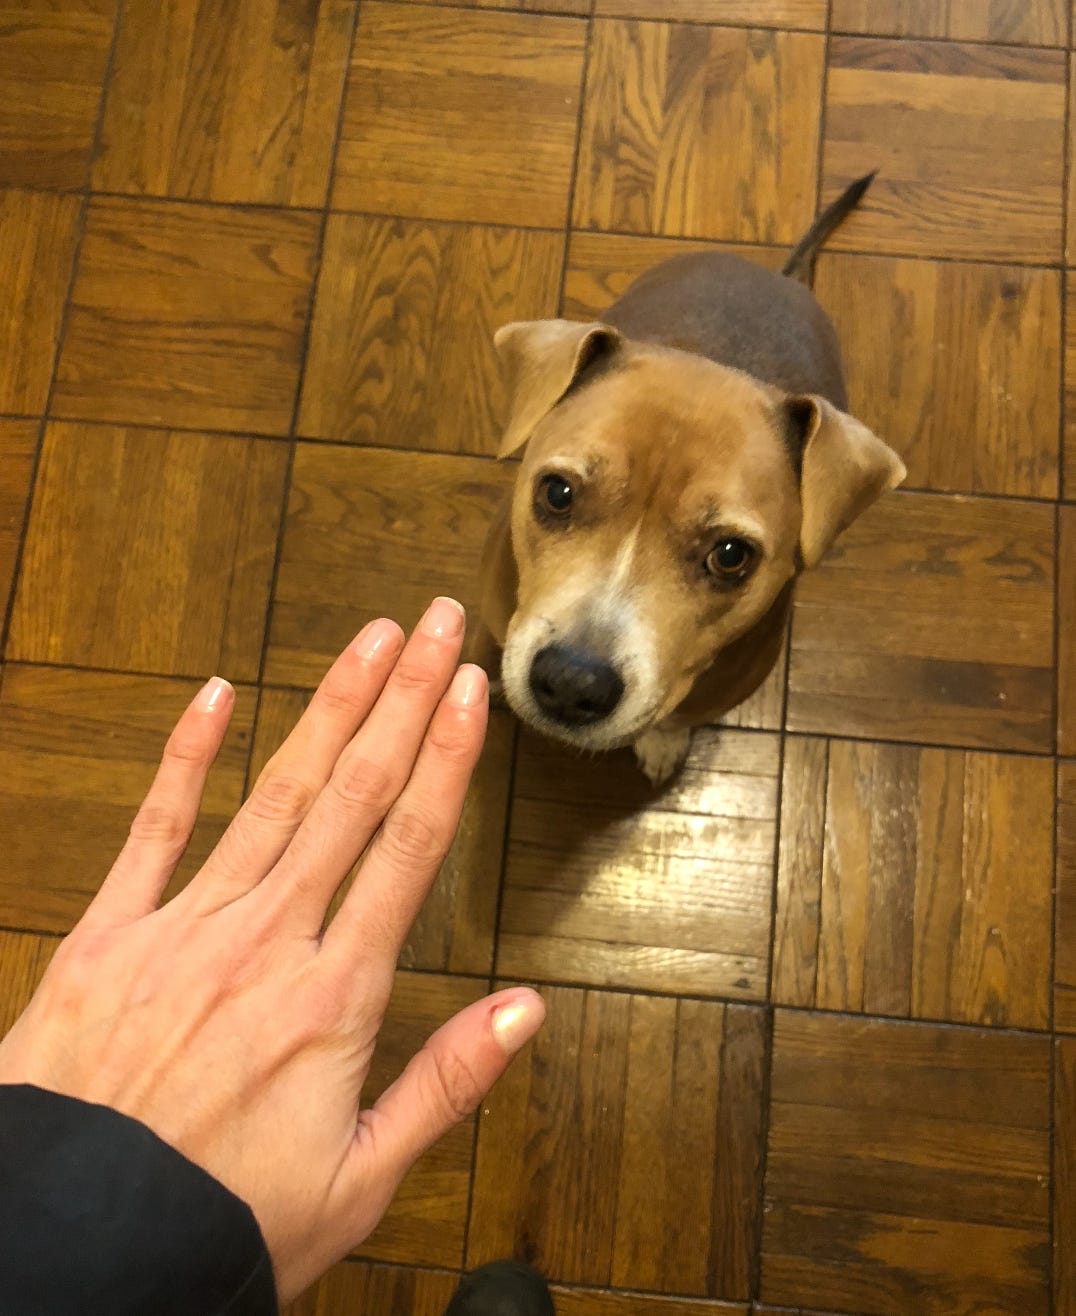 ID: My dog Clementine sits on the floor like a good dog with my hand outstretched over her. She looks teeny tiny. Like one bean.